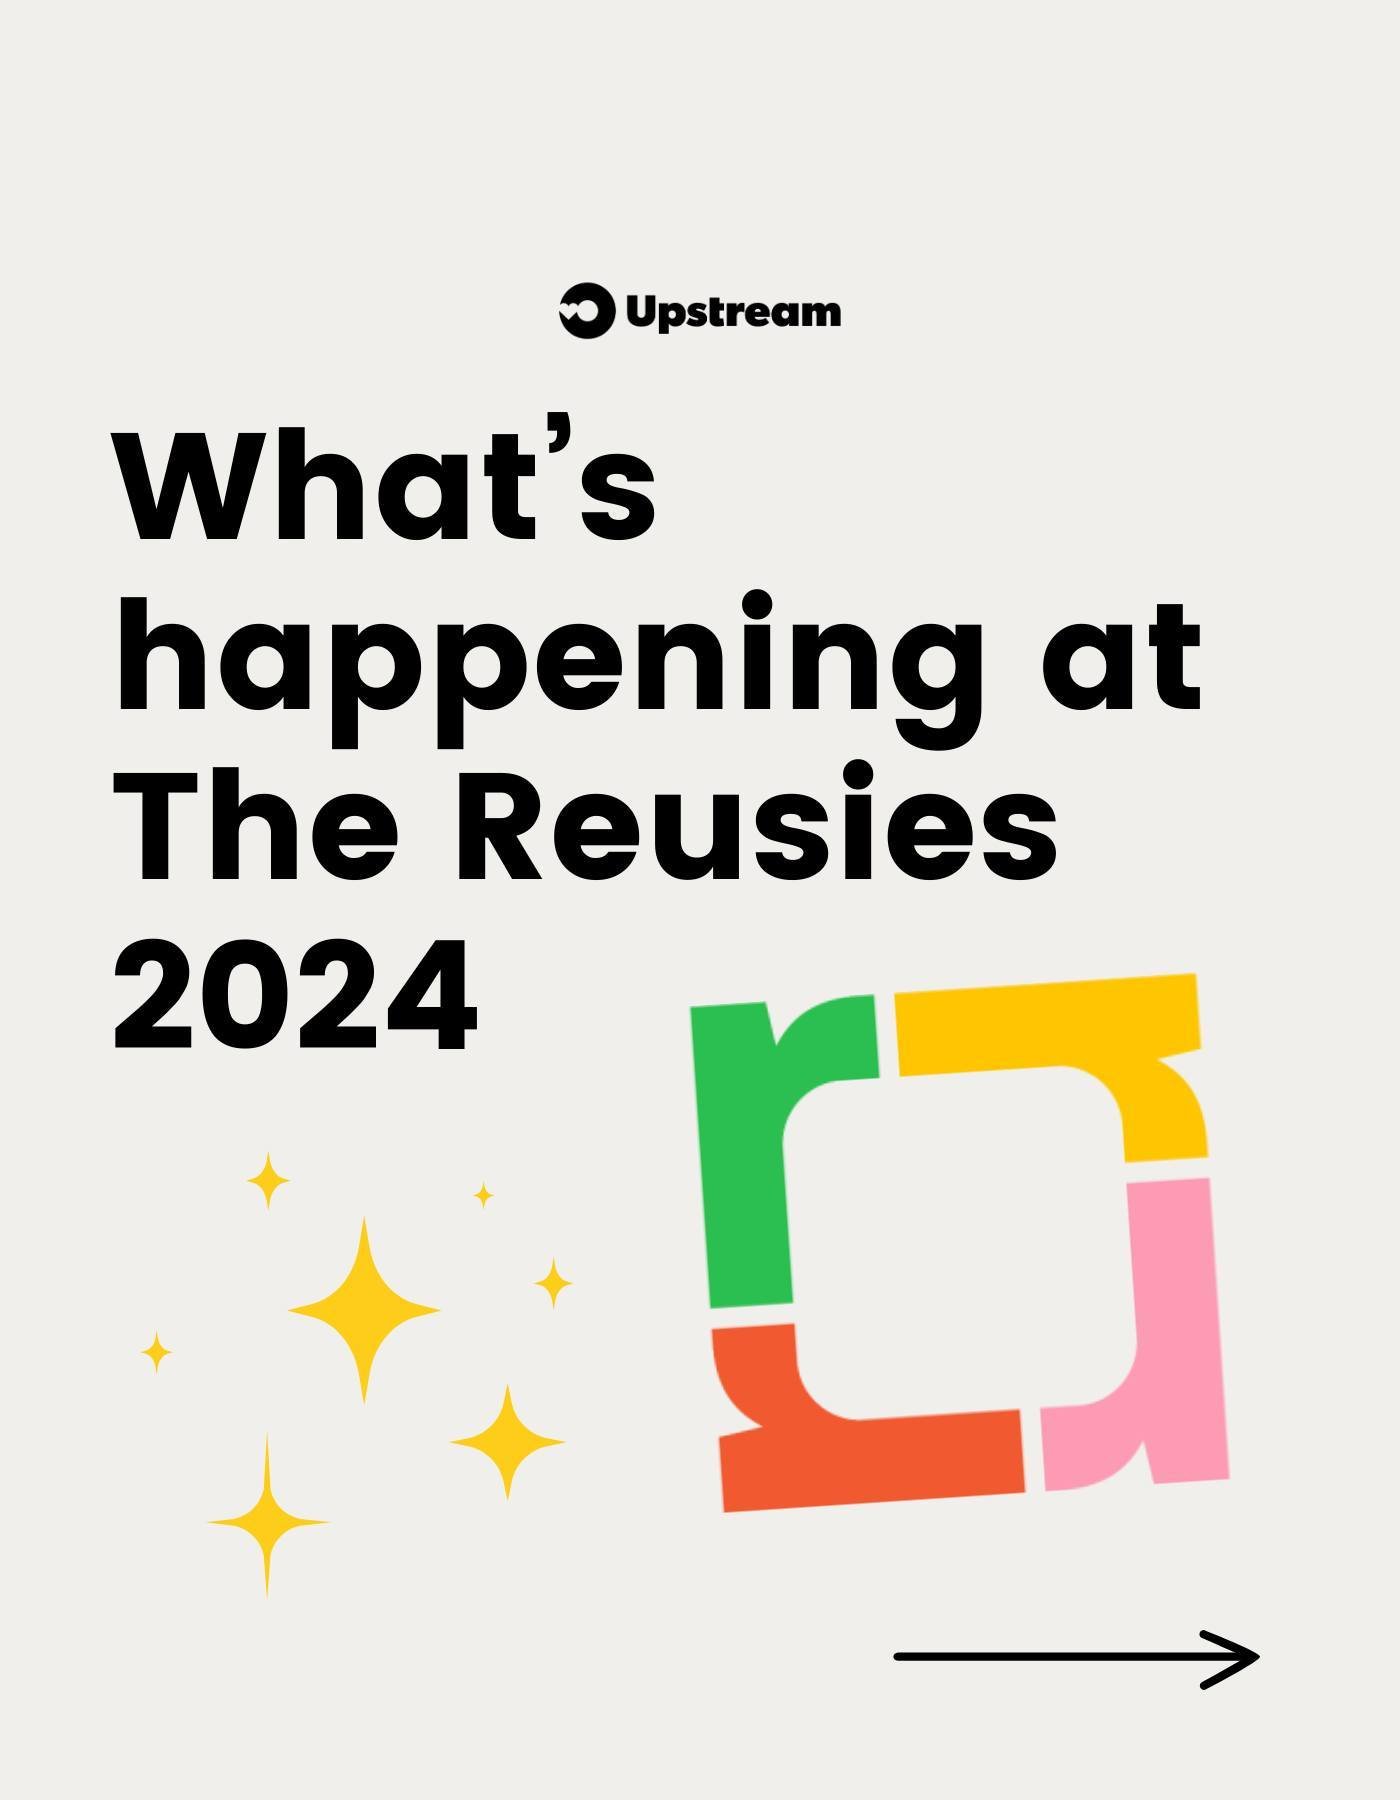 What are you most excited about? 👀✨

We are honored to be joined by so many incredible reuse heroes at The Reusies 2024. 

Amy Larkin of PR3, Bryan Lewis of GreenBiz @greenbiz_group, and Robin Raj of GSA @greensportsalliance , will have transformati